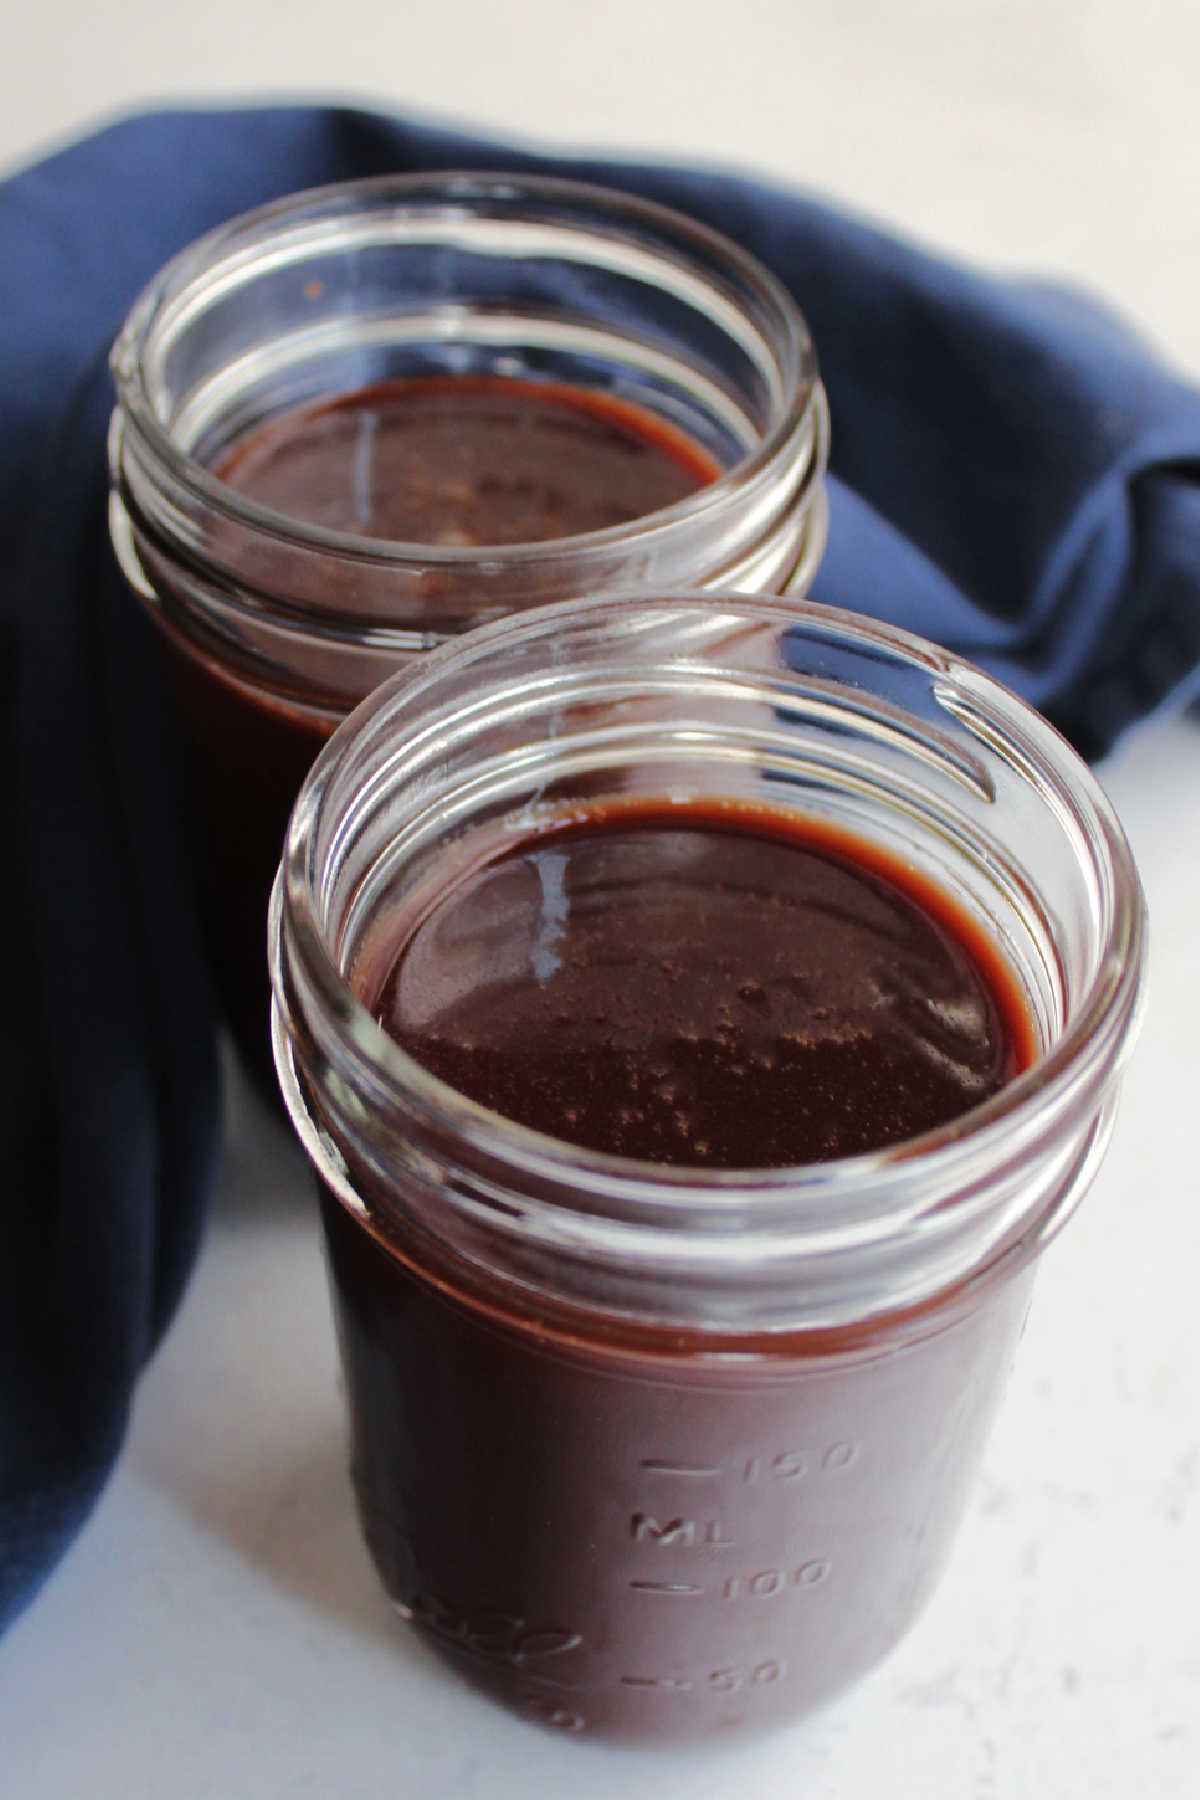 Two glass jars of freshly made hot fudge sauce ready to use.